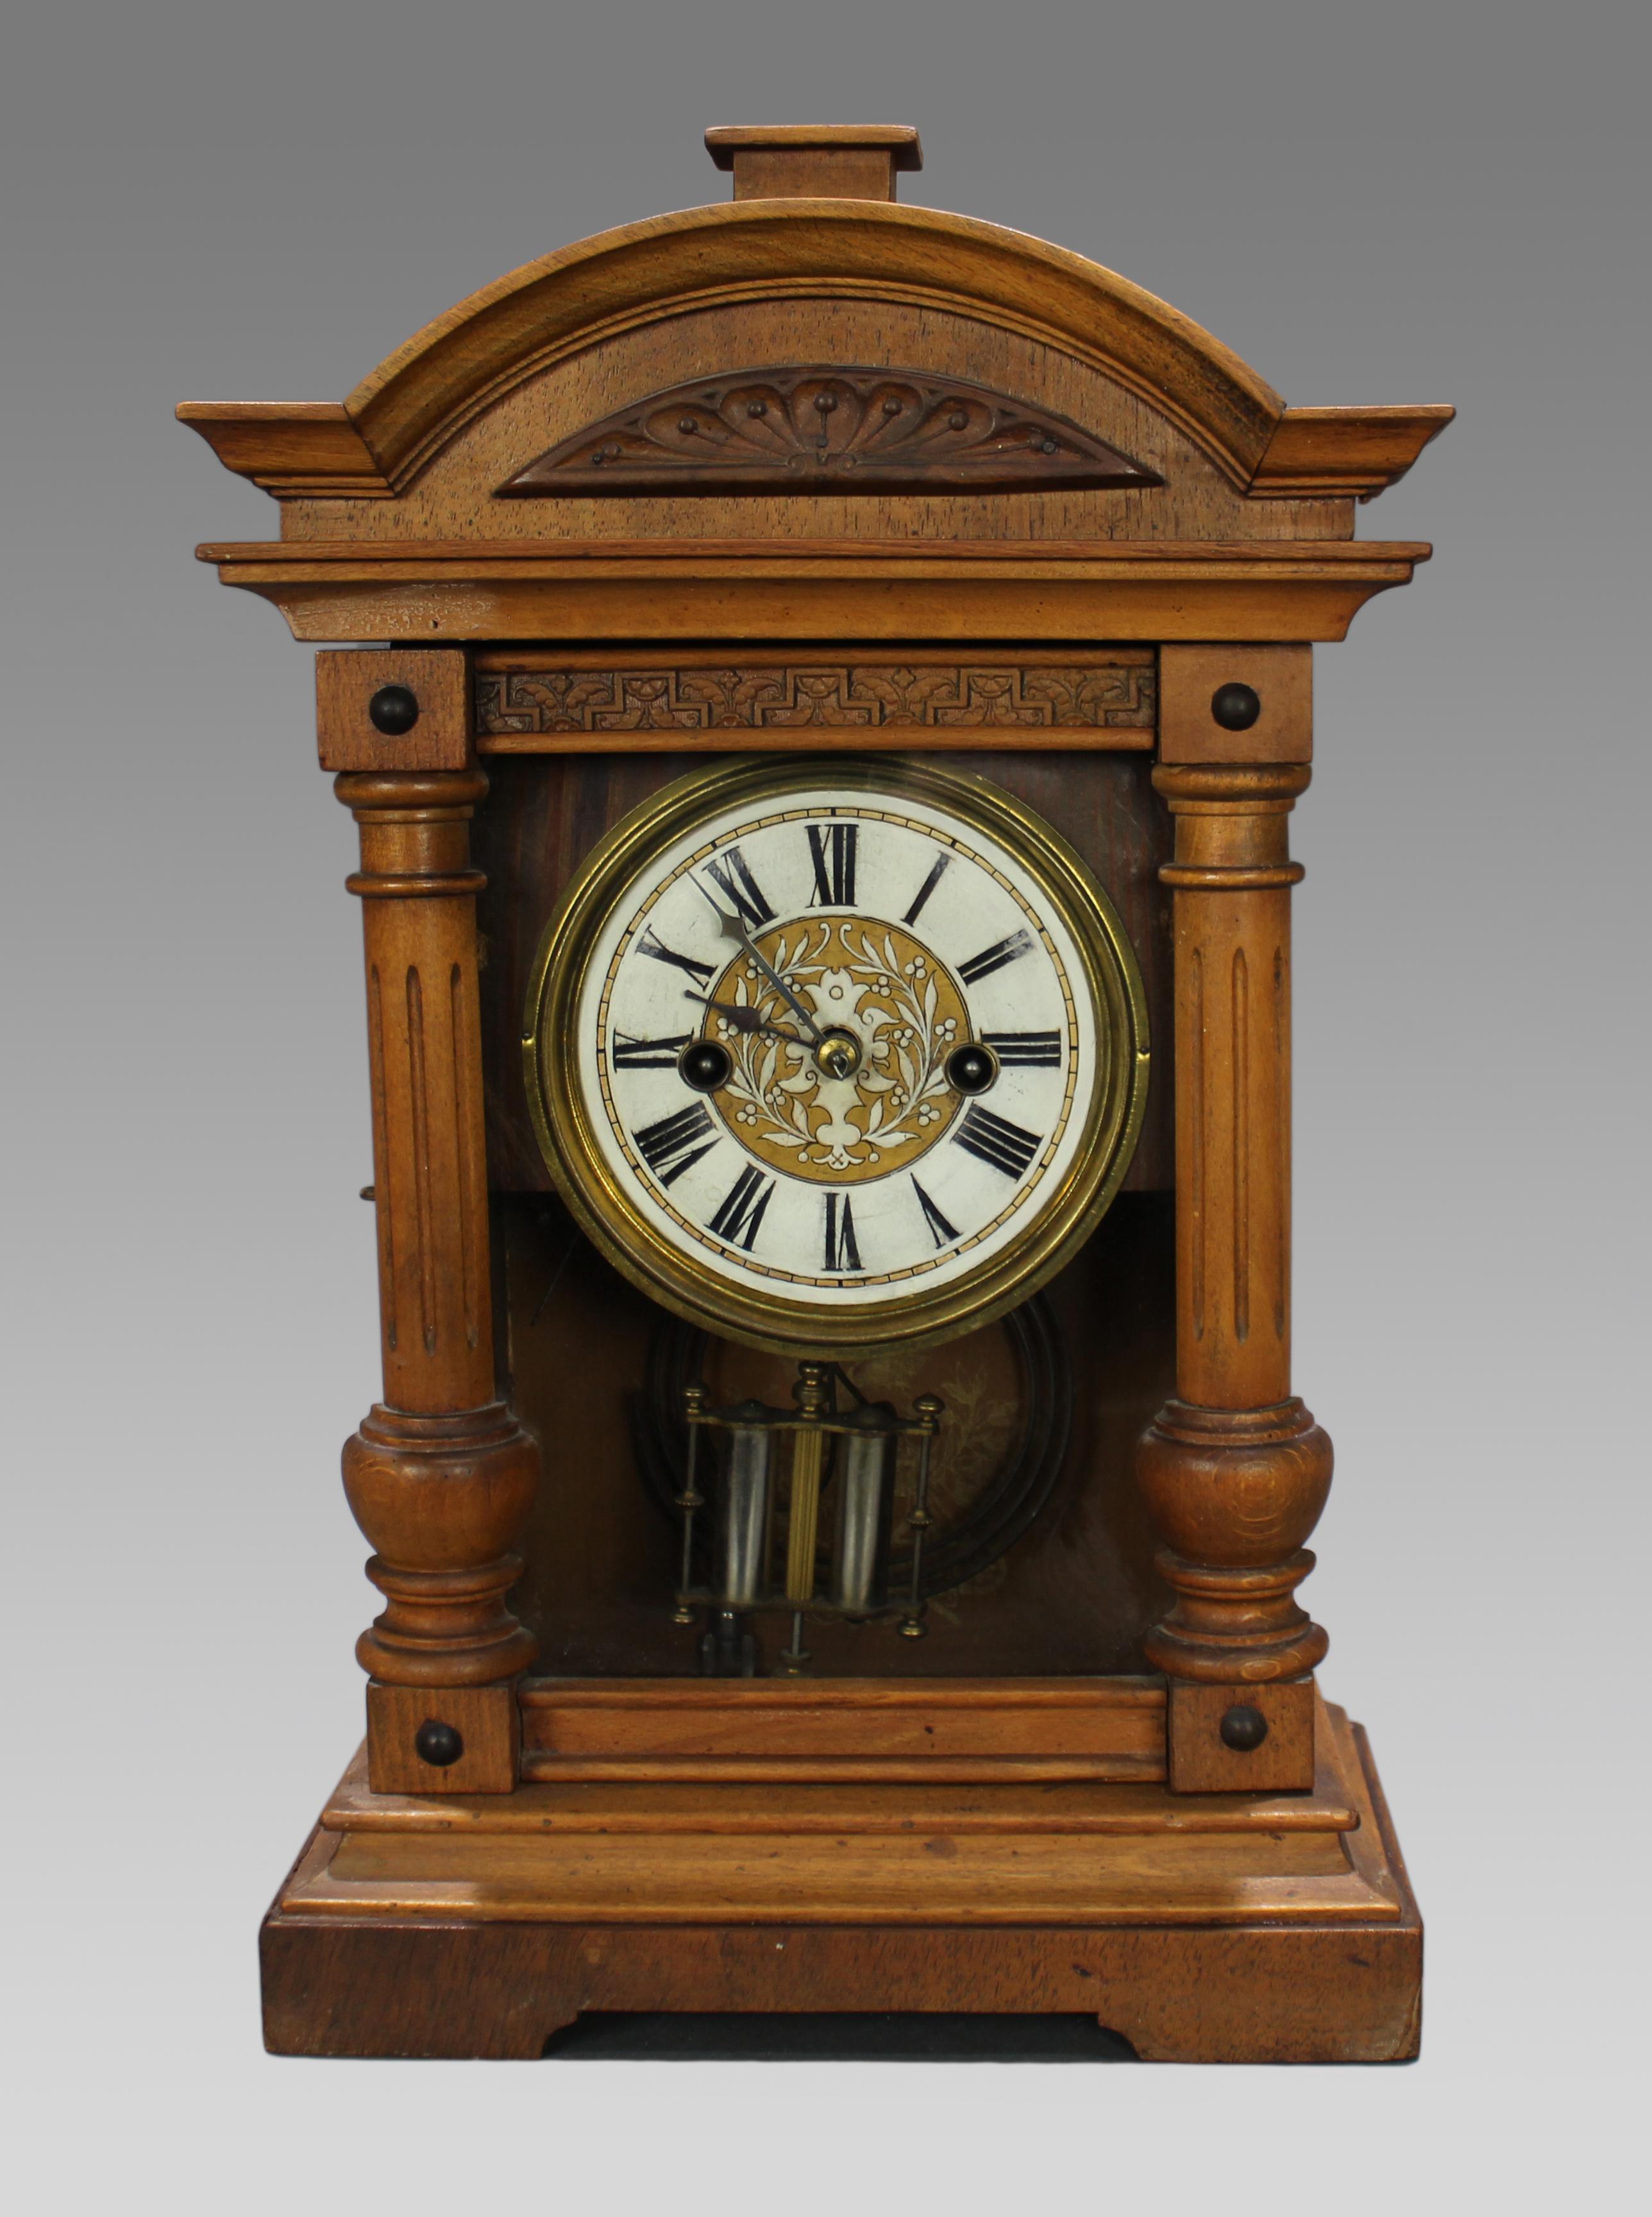 Antique German Wurttemberg Mantle Clock c.1900


German, c.1900, Wurttemberg

Measures 24 x 12 x 38.5 (height) cm

Brass dial with enamel chapter ring. Blued steel hands, Roman numerals

Carved pine case

8 day movement, striking on